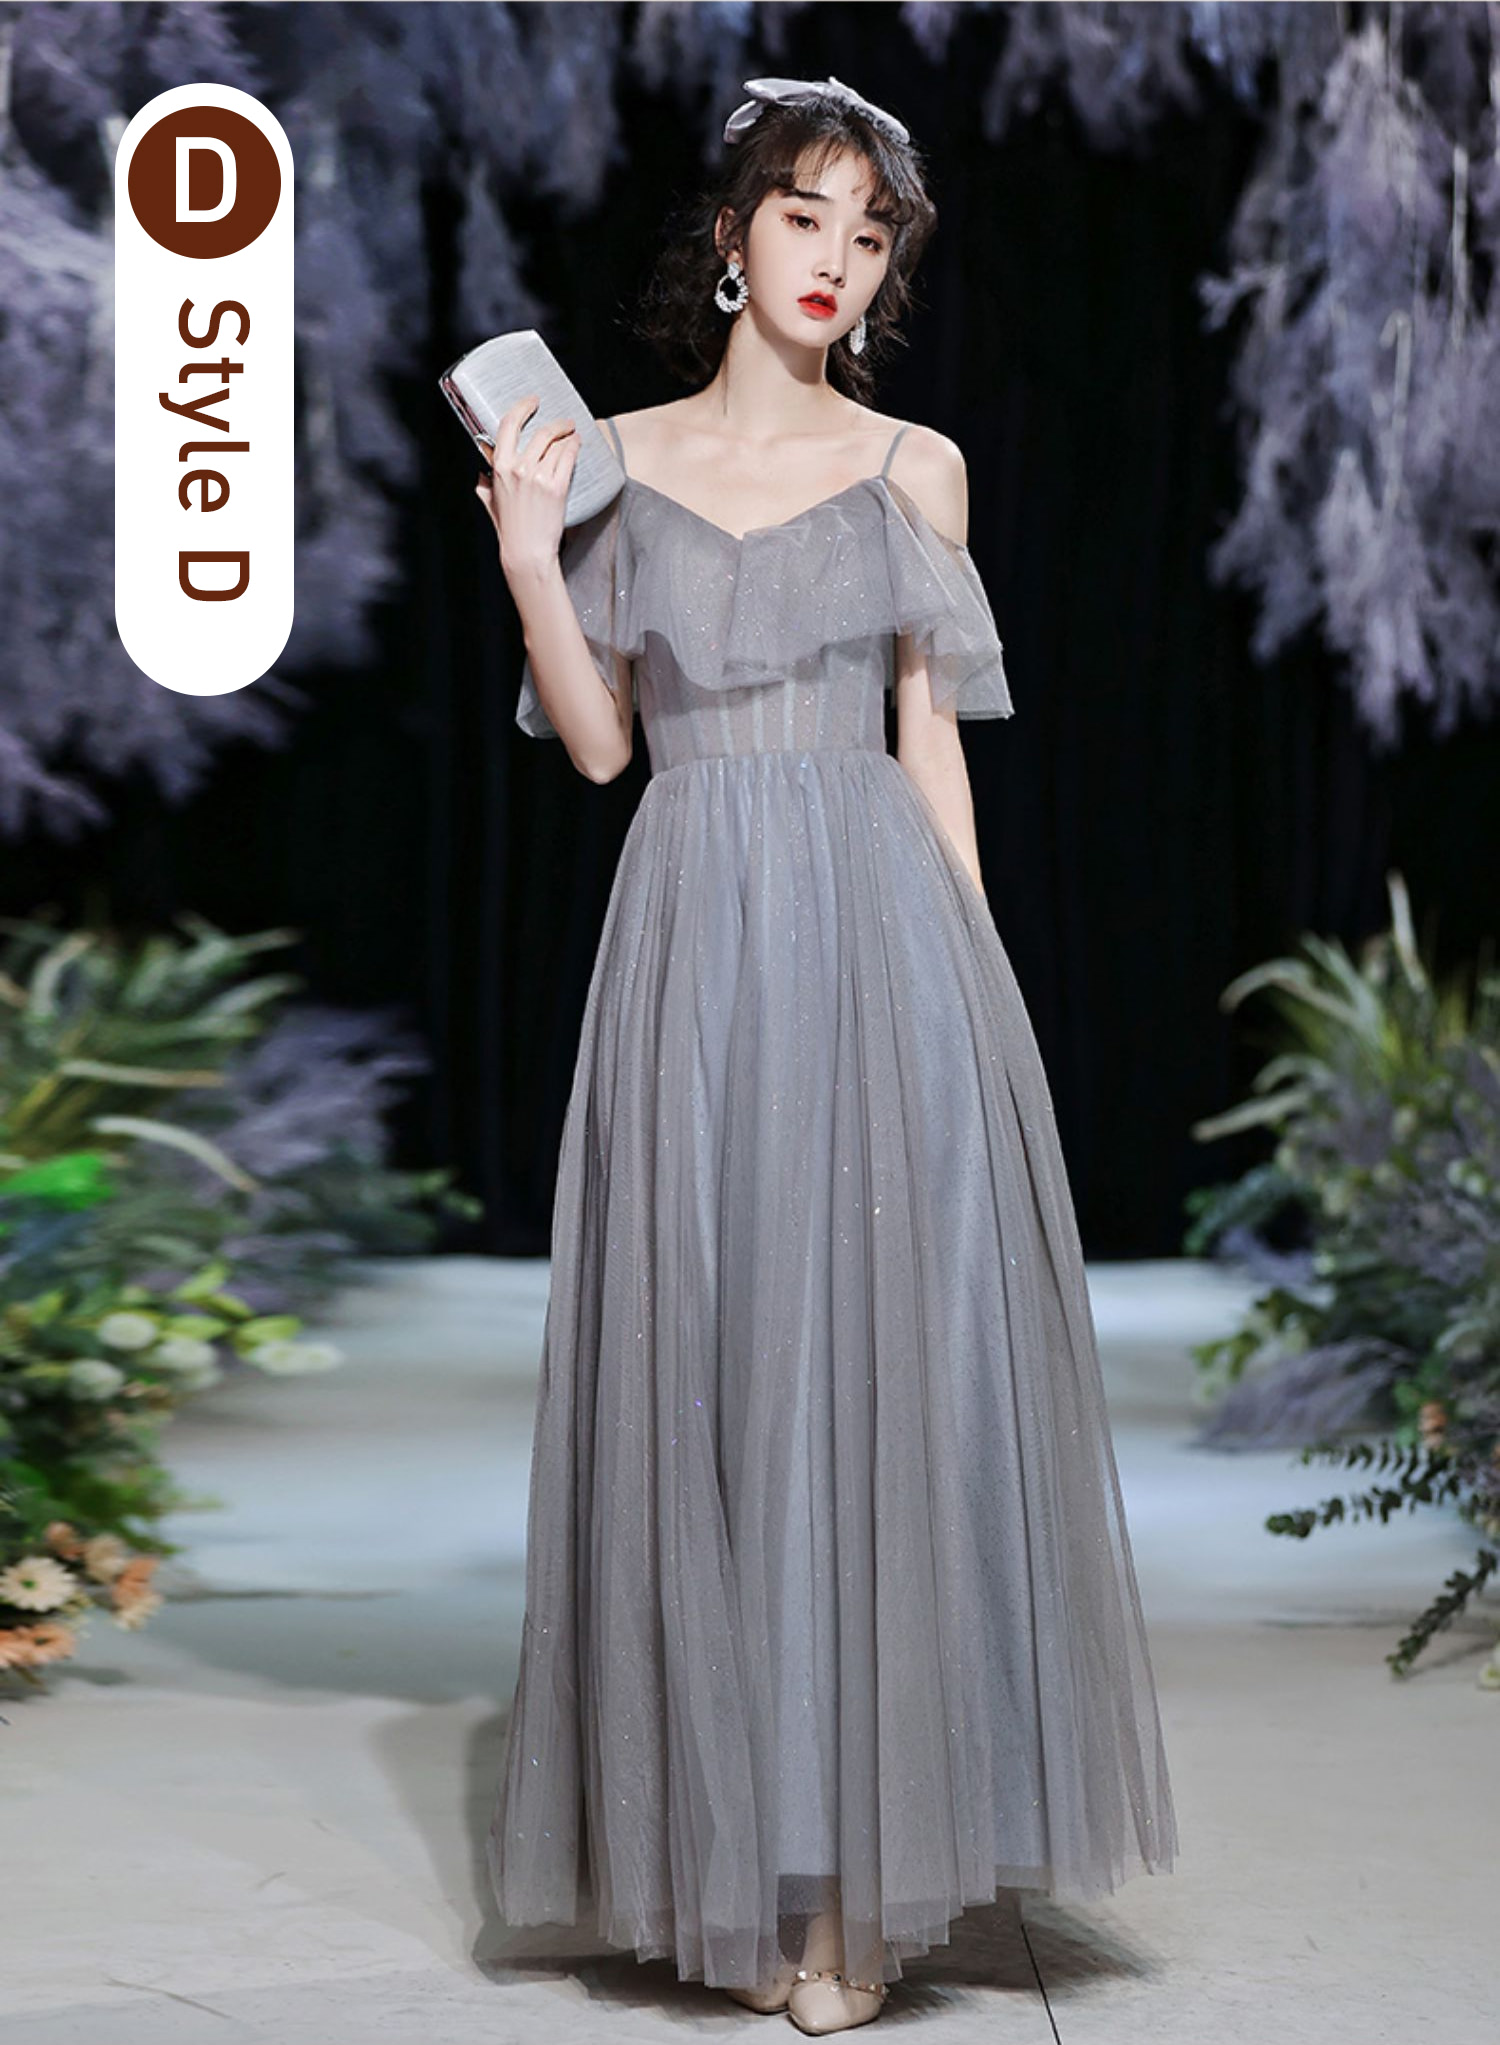 Unique-Gray-Bridal-Party-Dress-Multiway-Prom-Evening-Wedding-Gown24.jpg